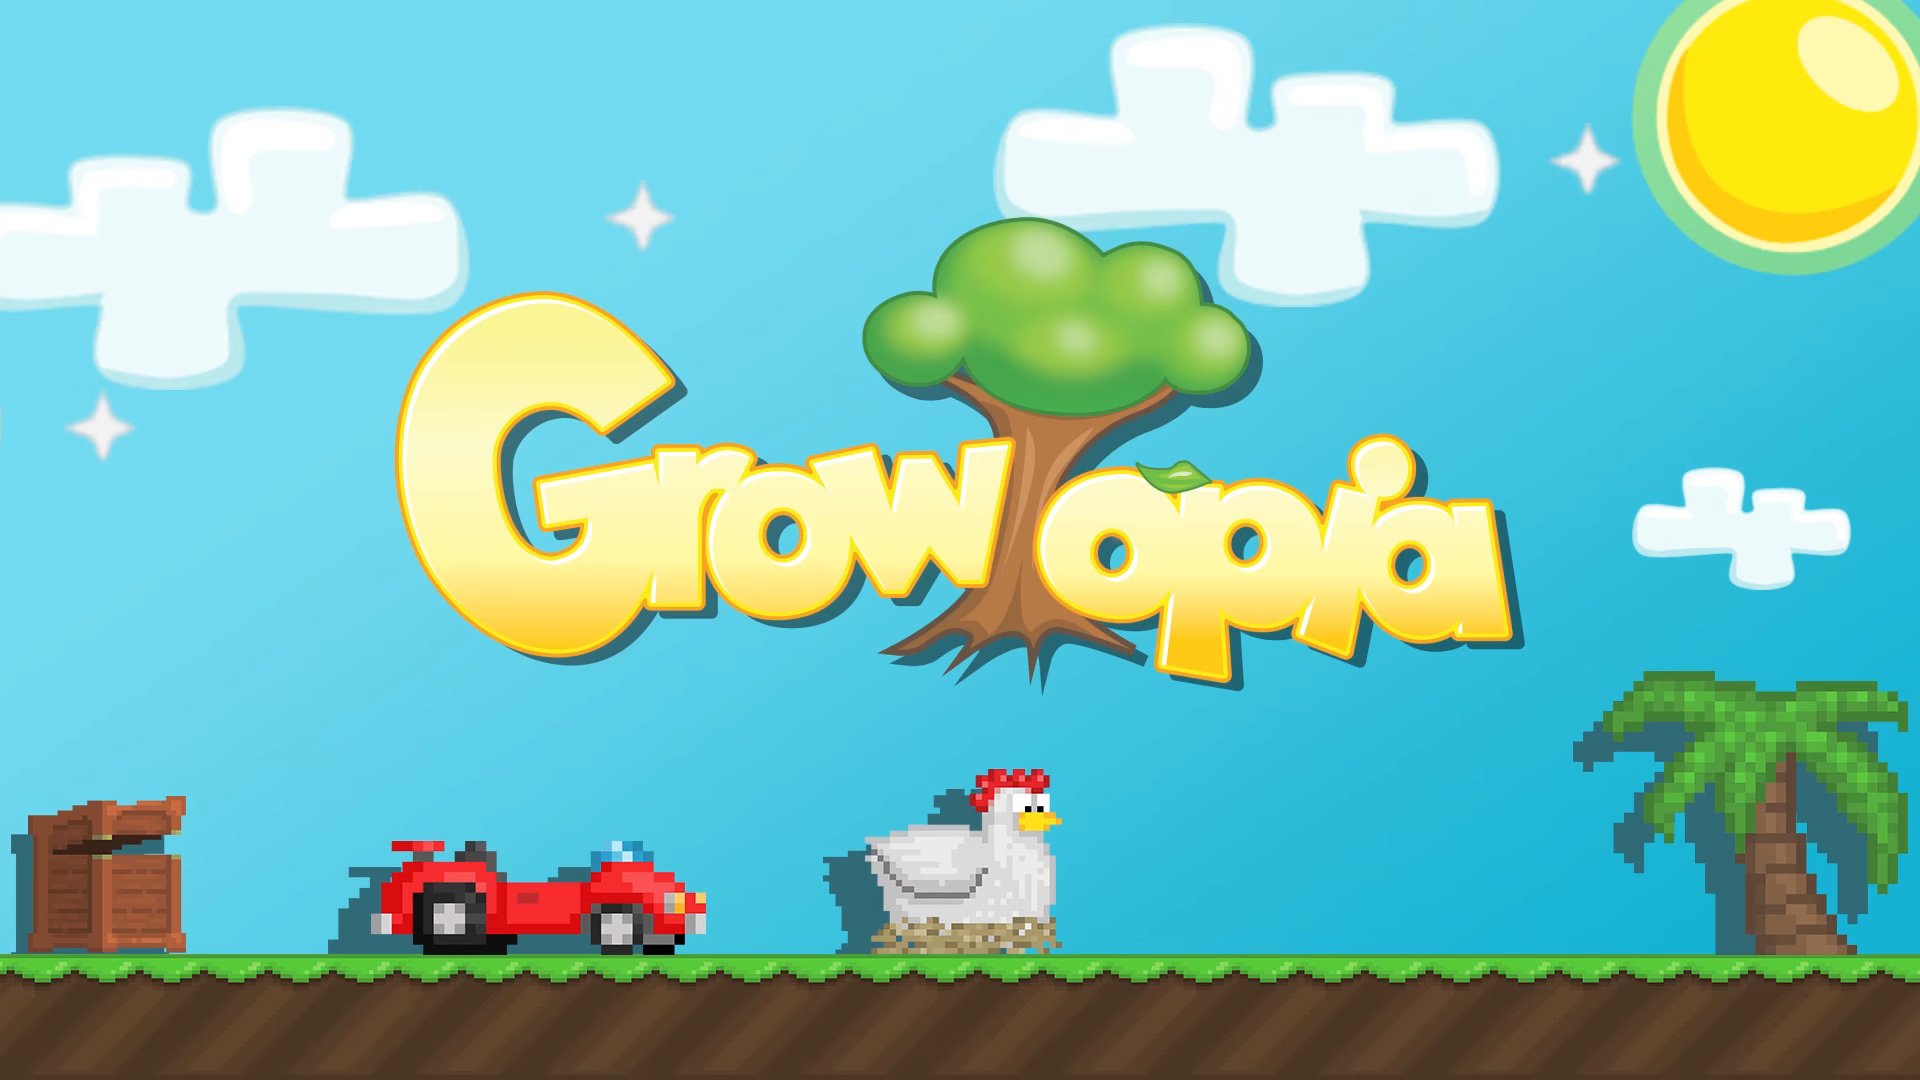 play growtopia online no download